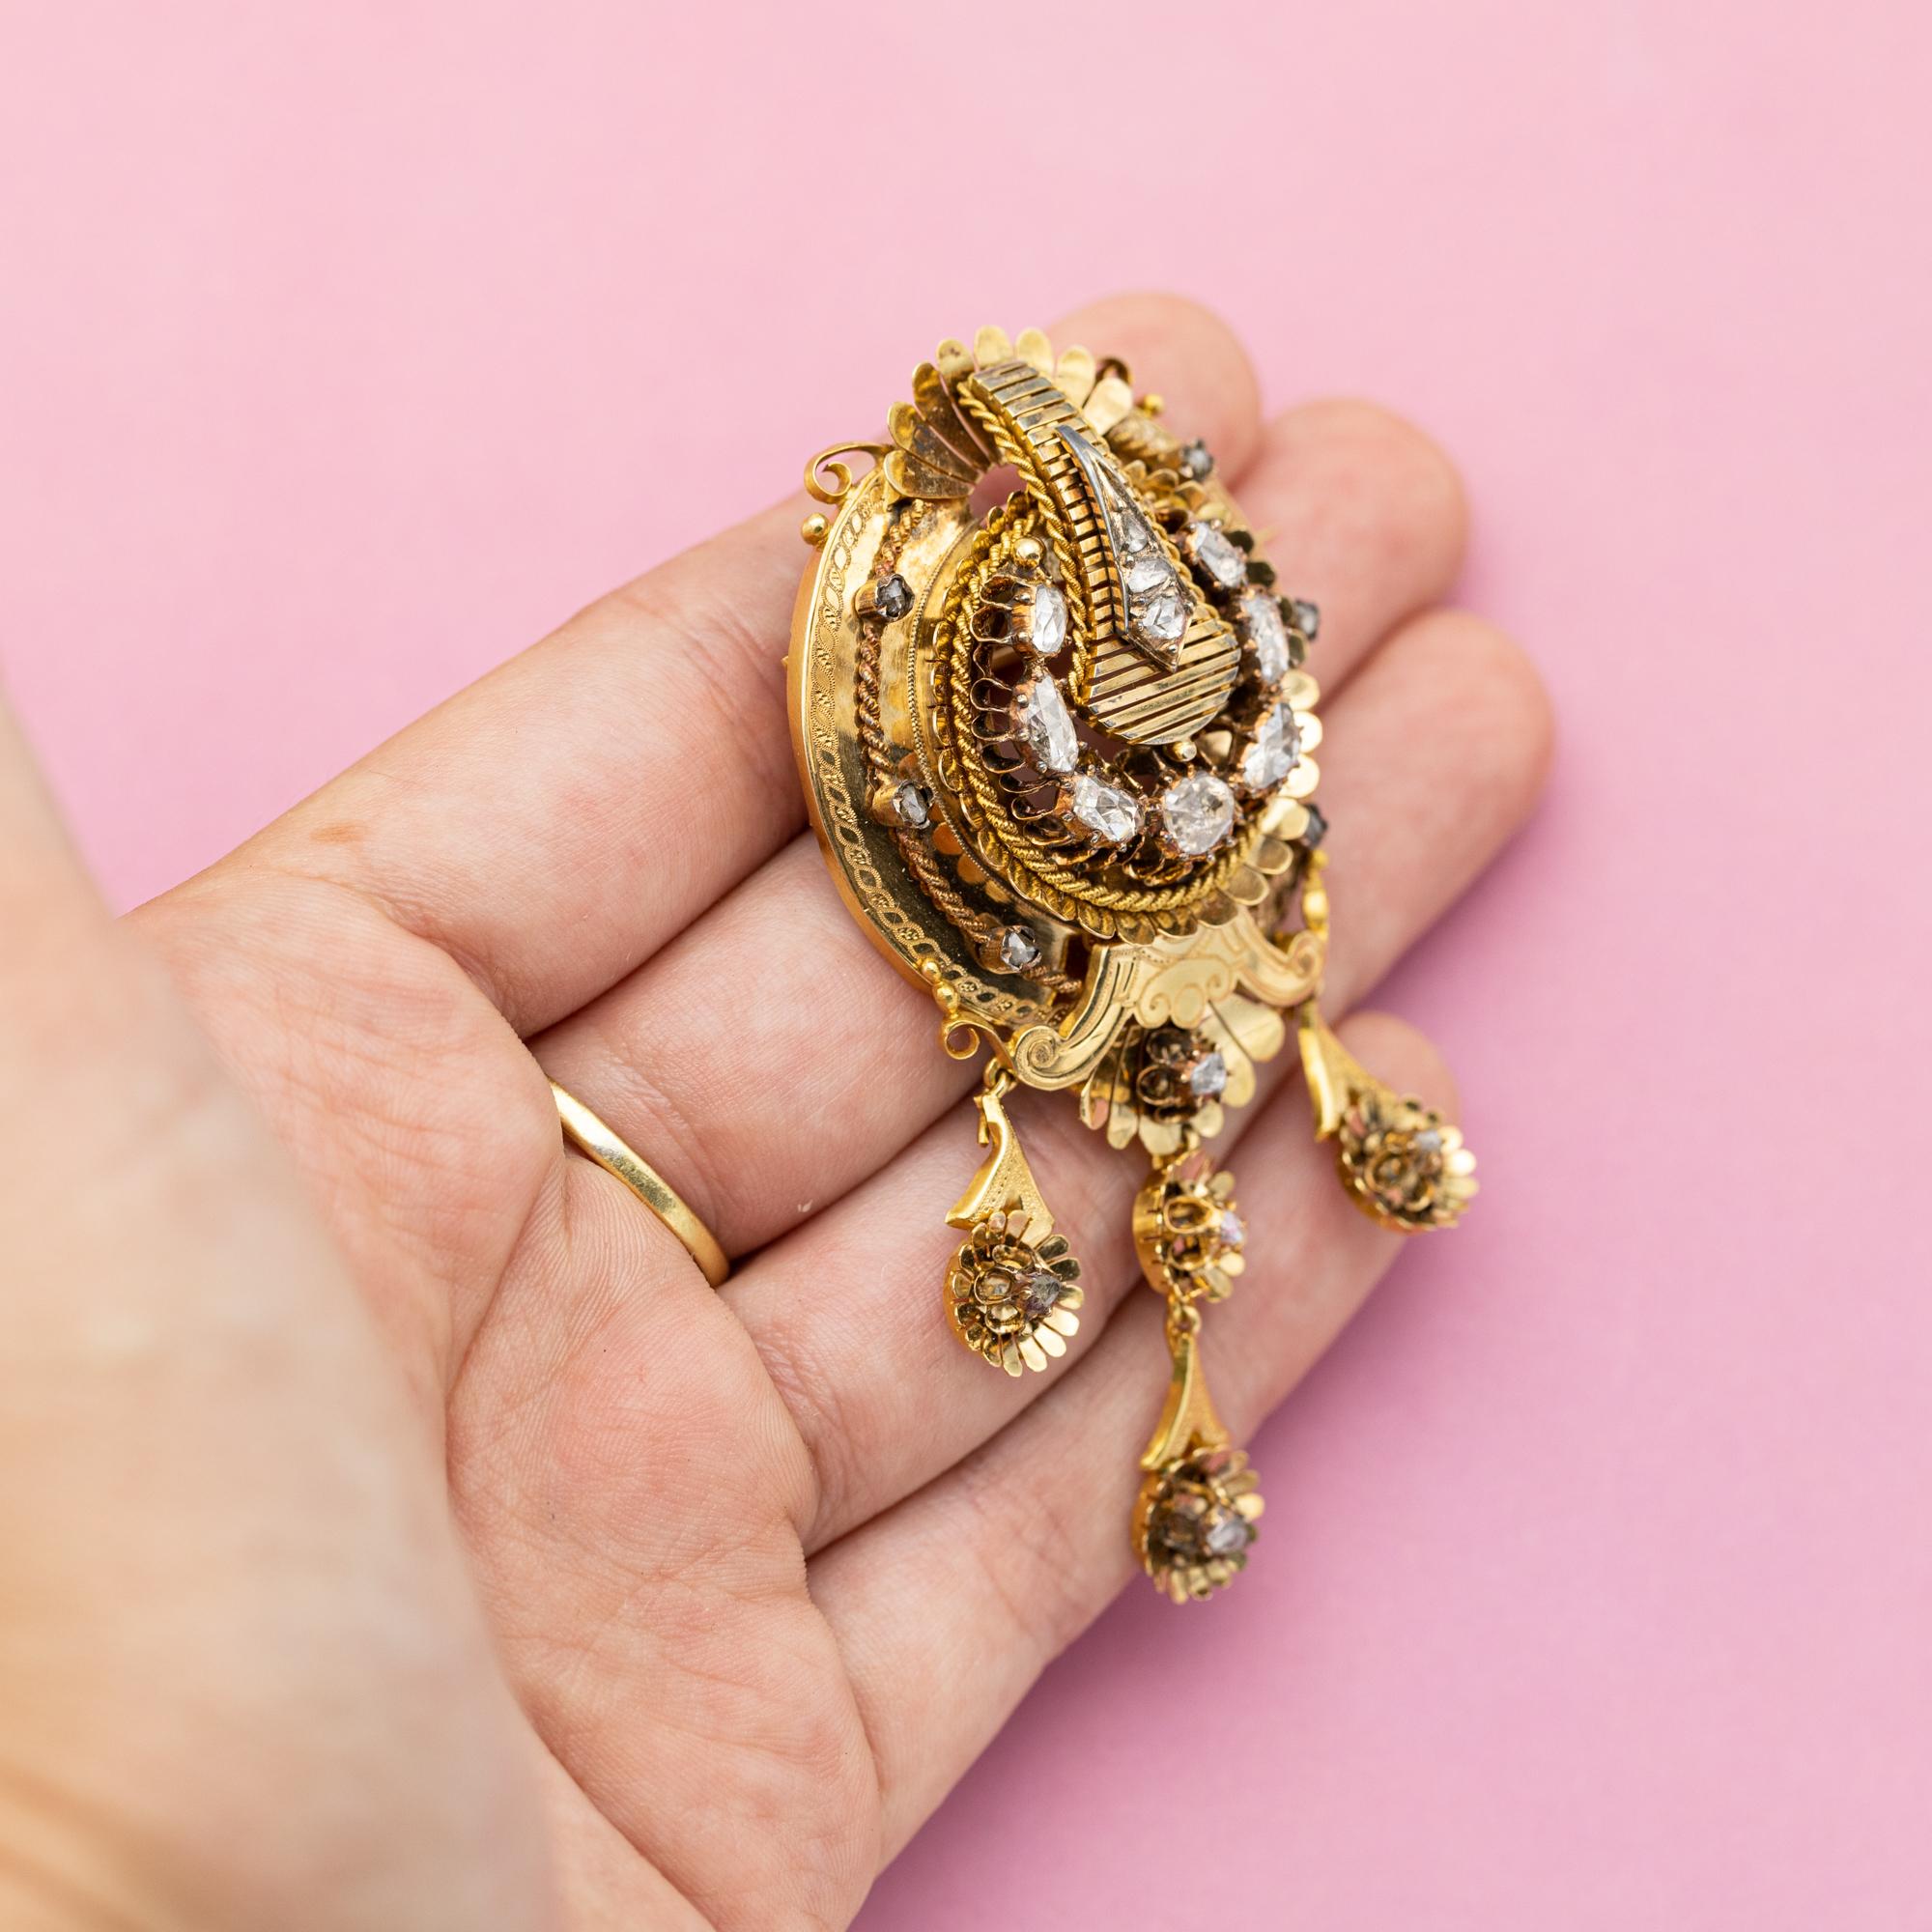 18ct yellow gold Victorian brooch - Large and heavy foiled back diamond heirloom For Sale 3